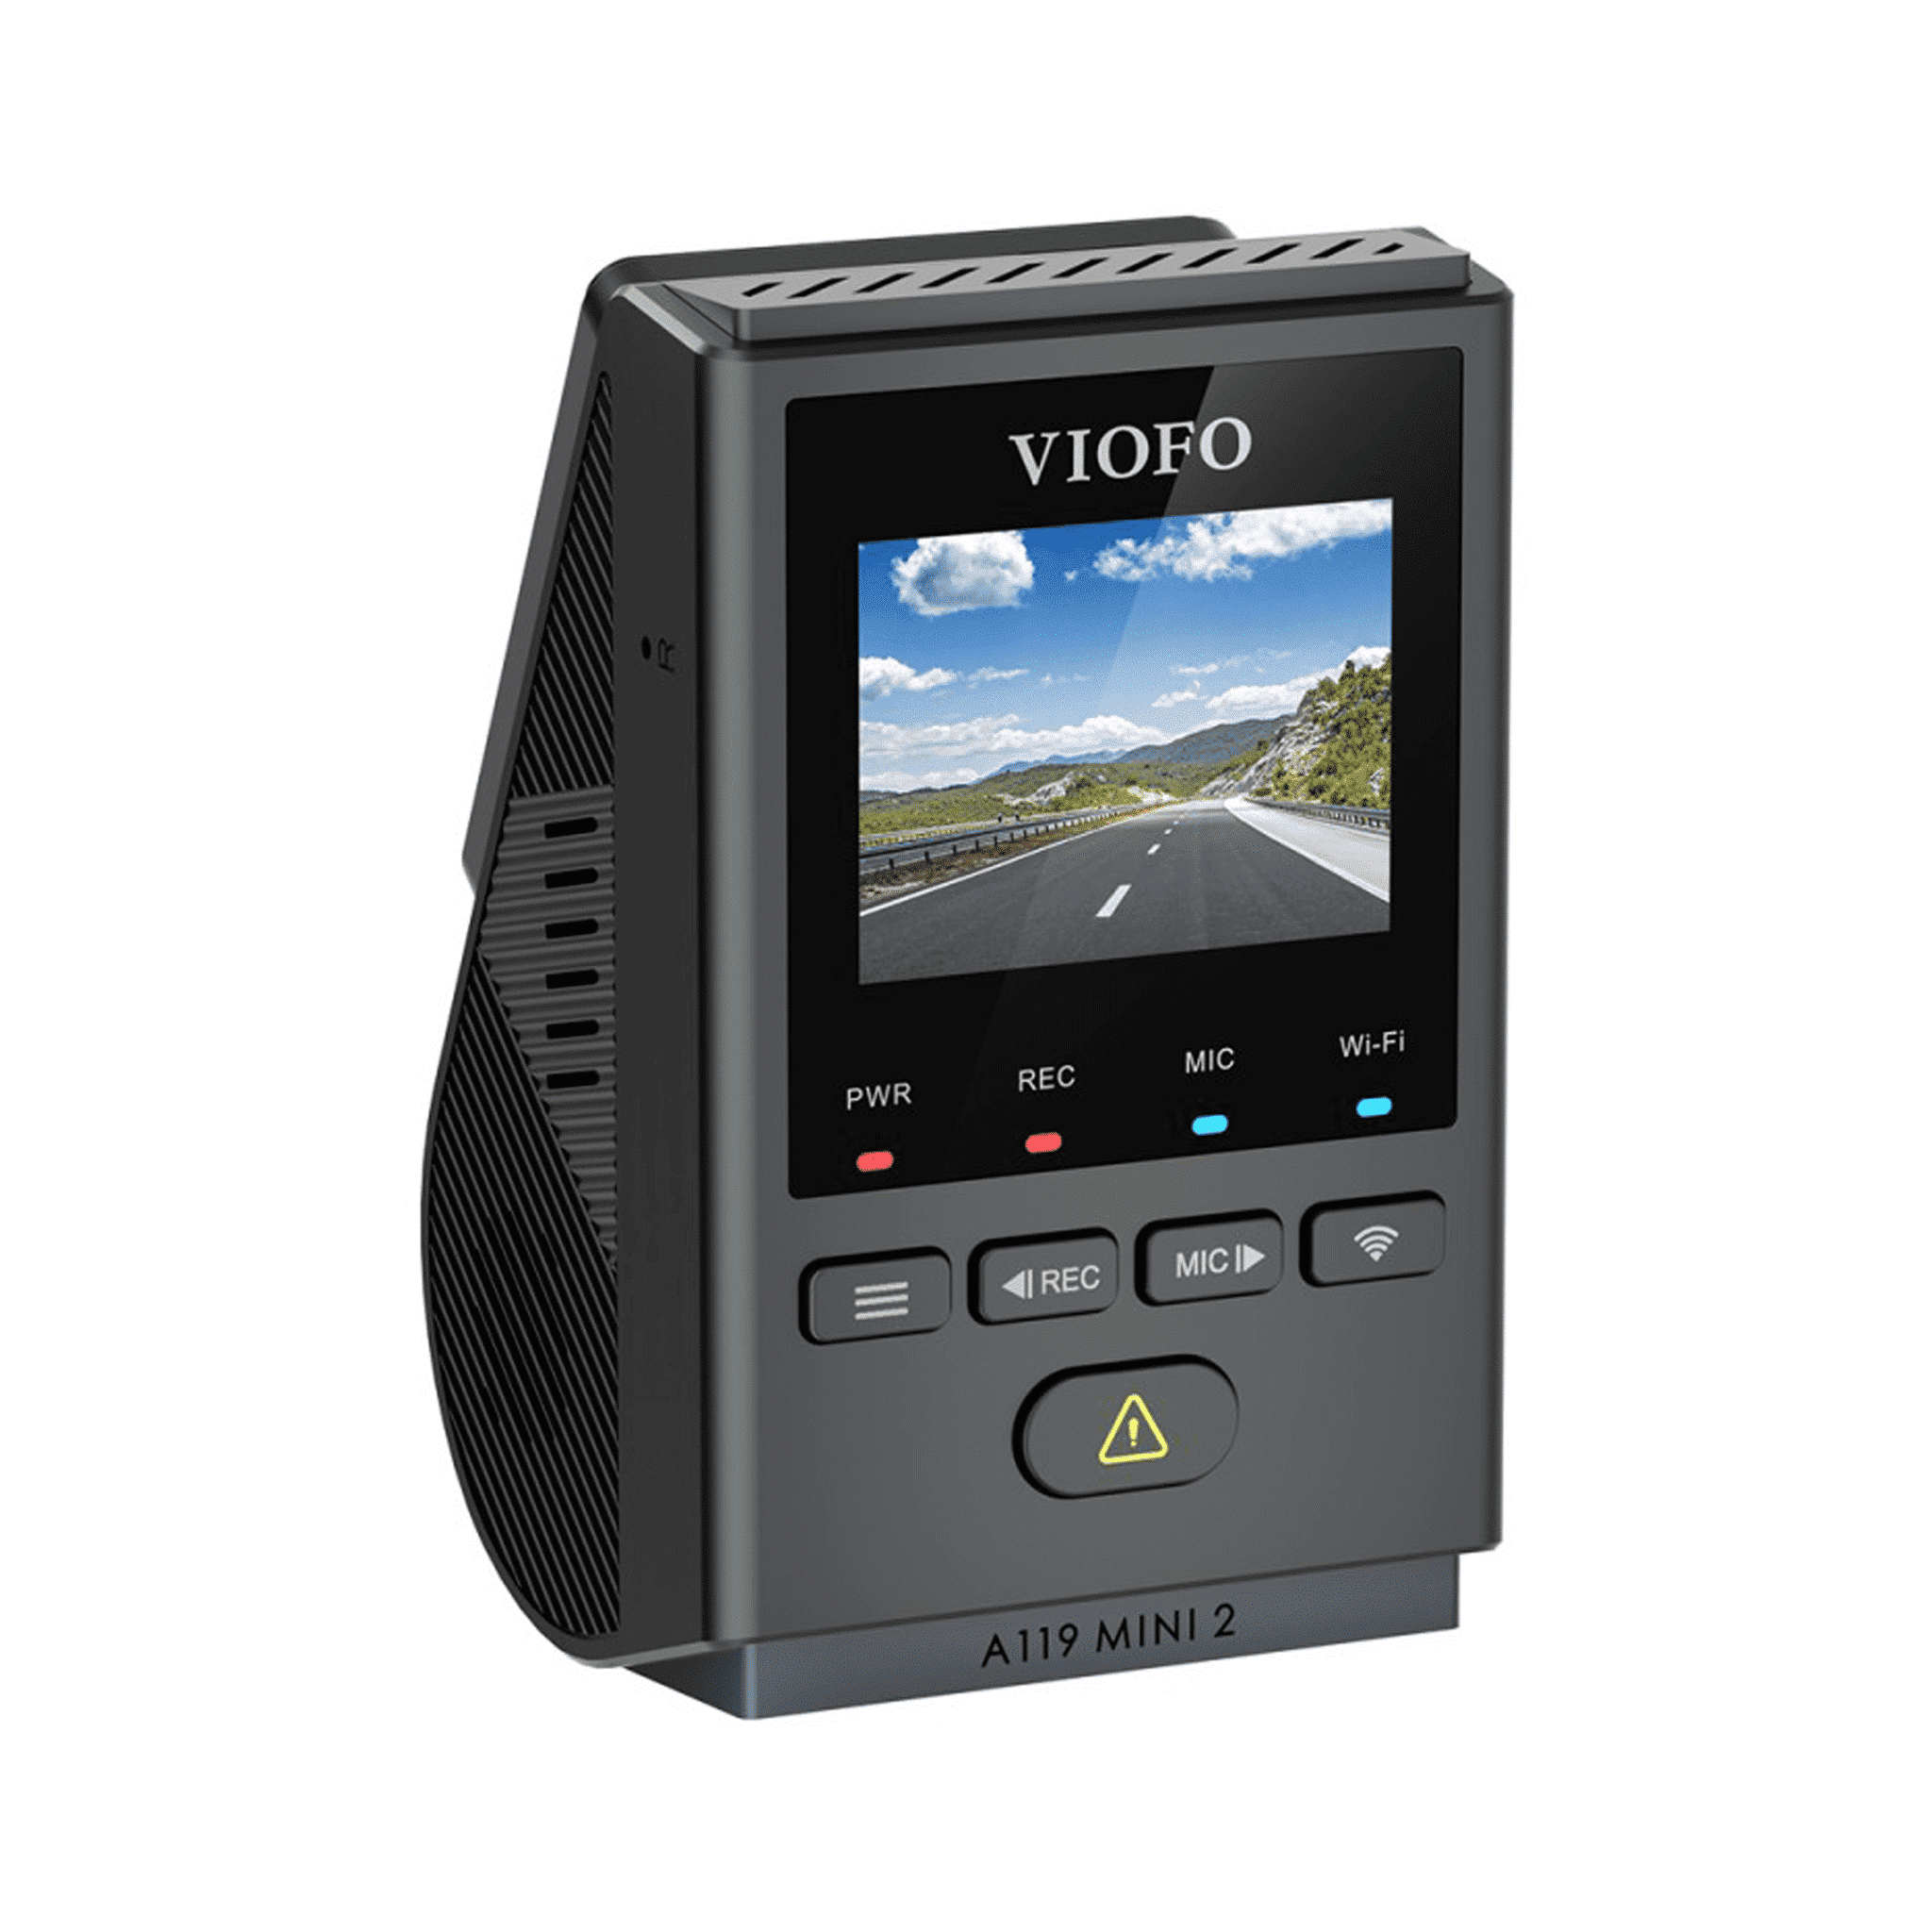 VIOFO's multi-channel dash cams offer 1440p and 1080p resolutions